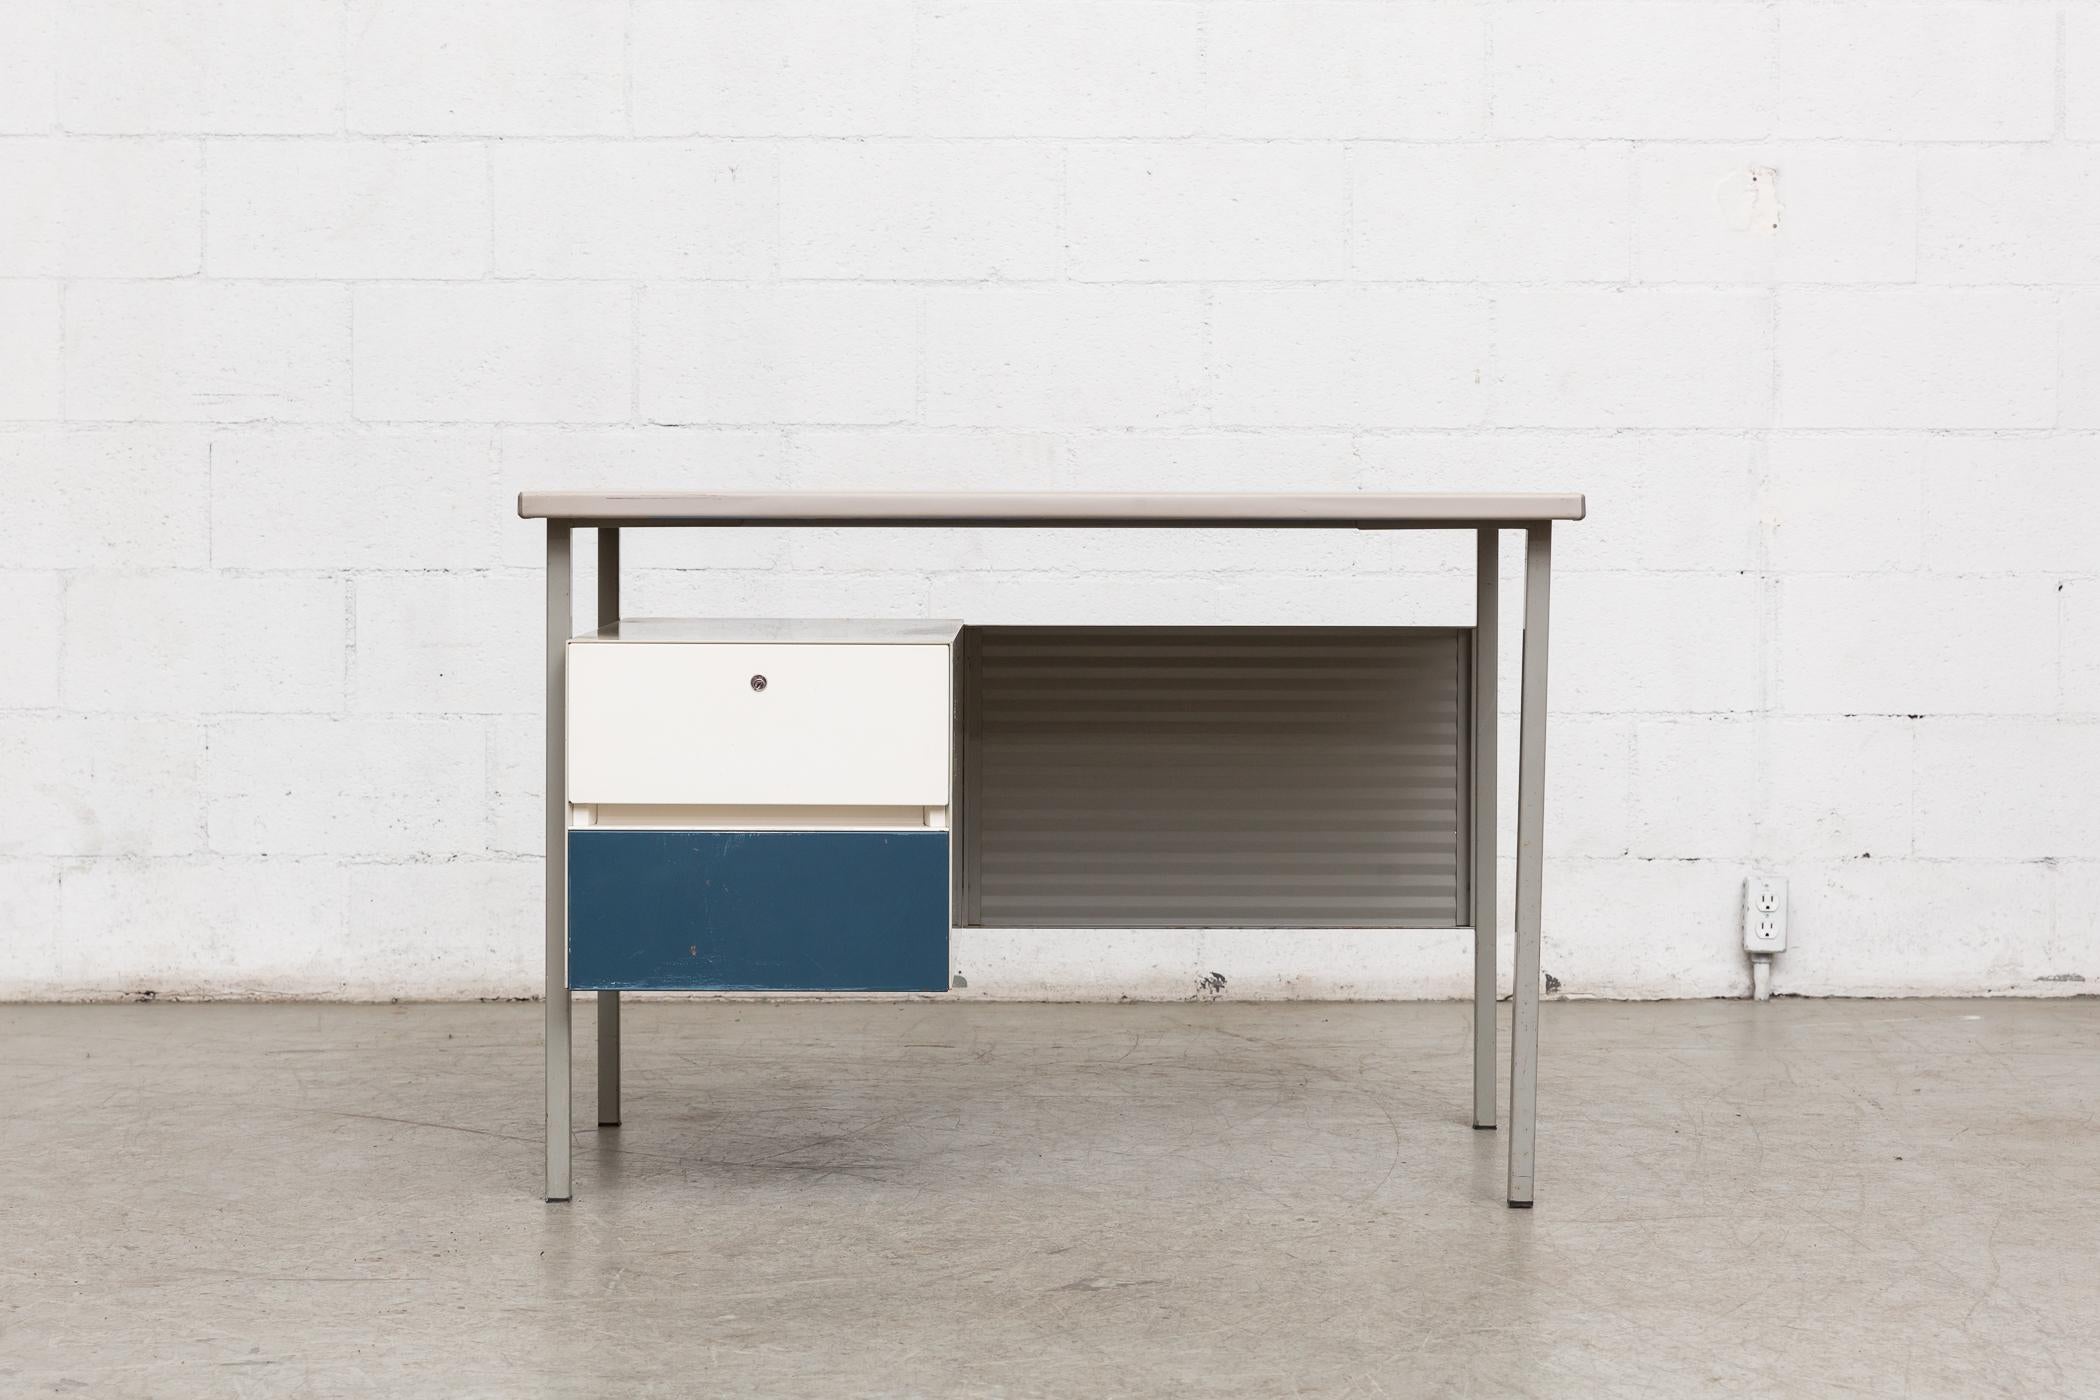 Midcentury industrial metal desk by A. R. Cordemeyer for Gispen. Light grey enameled metal desk with corrugated metal privacy screen, white and blue enameled metal Drawers and grey linoleum top. no key: (Visible wear, some scratching and metal loss.